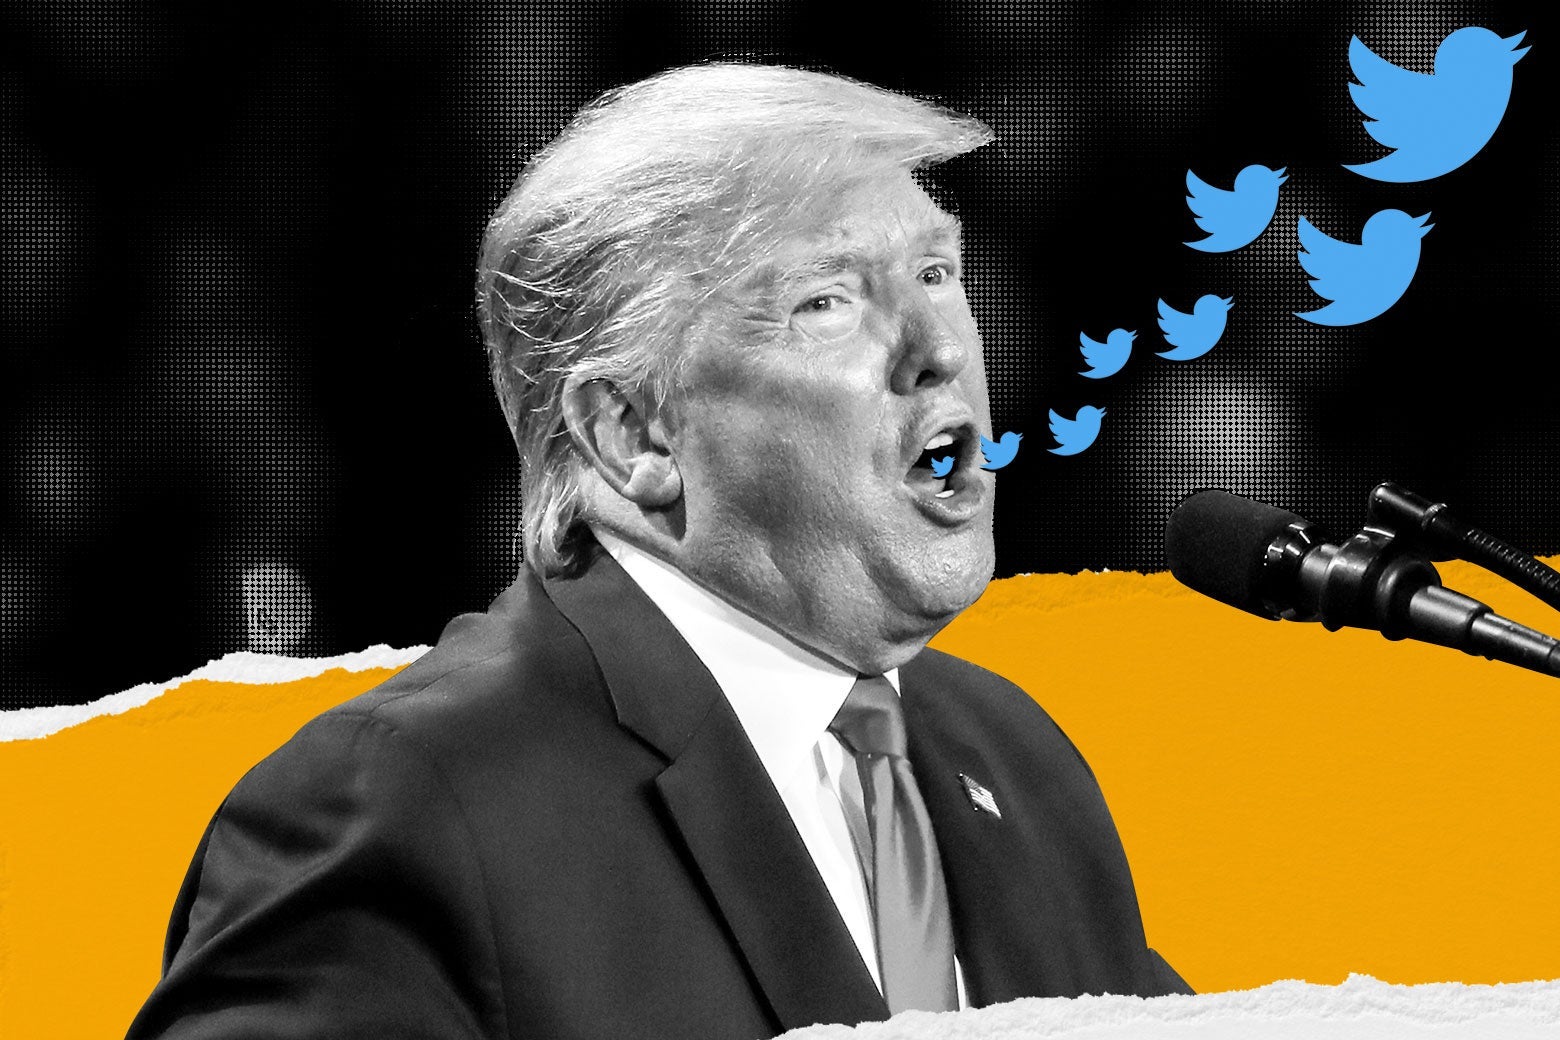 Donald Trump with Twitter birds flying out of his mouth as he speaks at a mic.